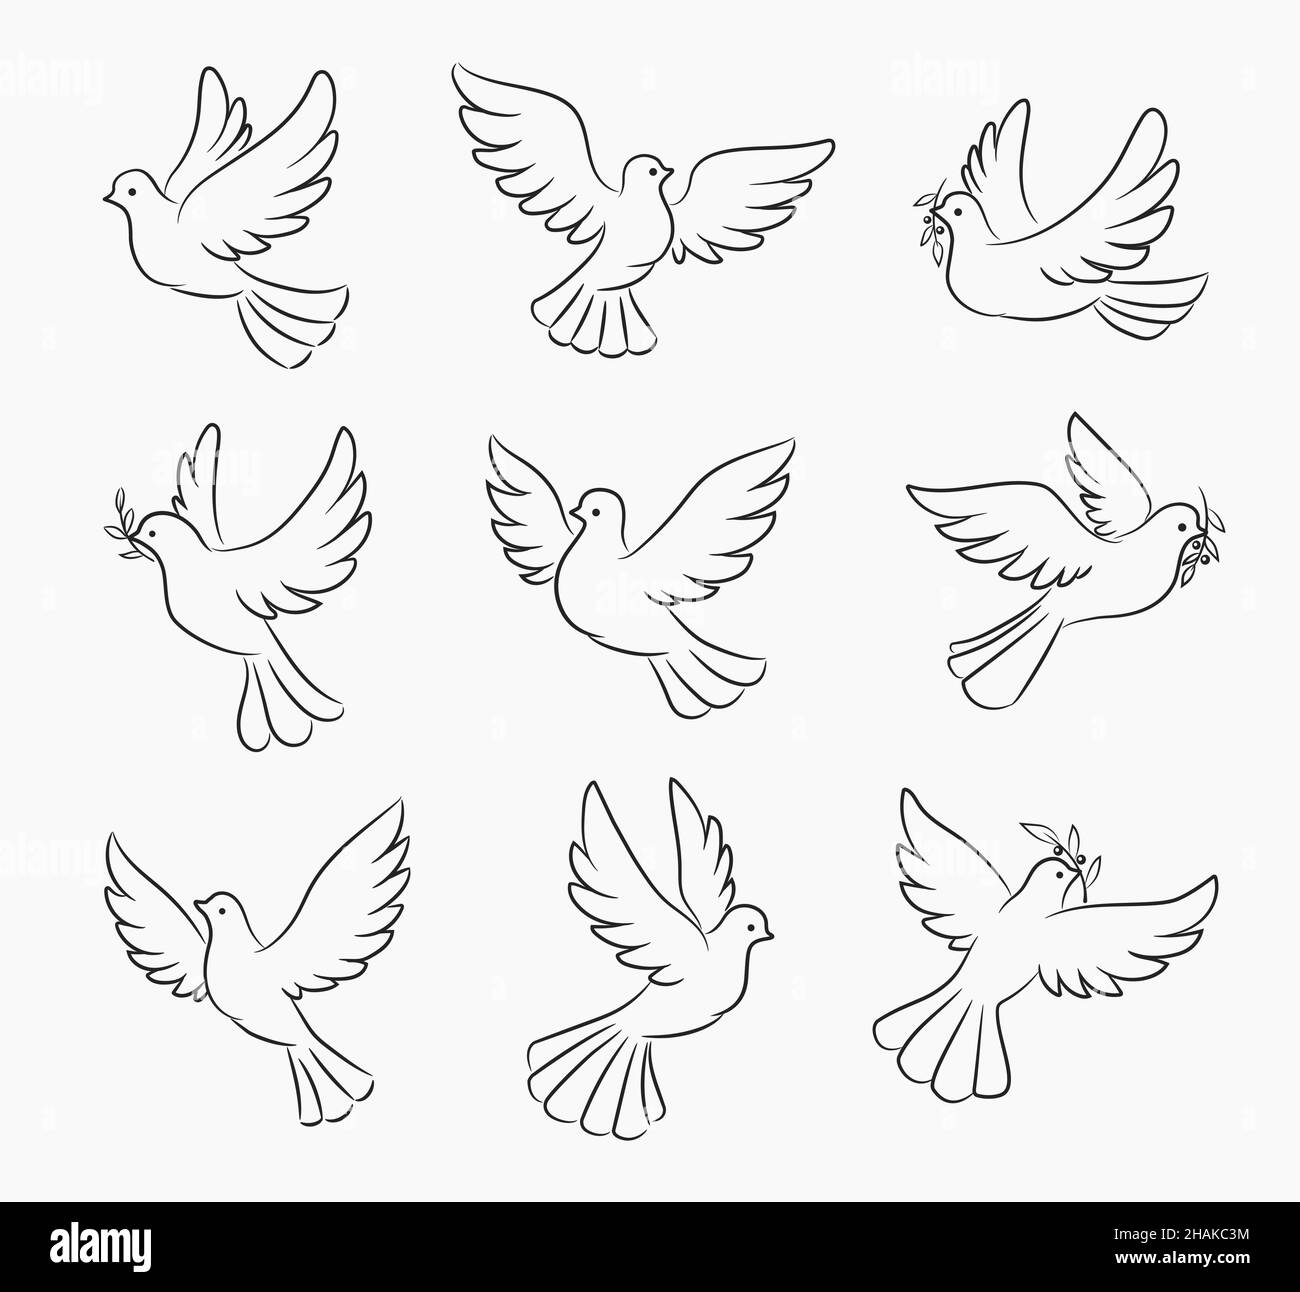 Christmas dove and pigeon bird vector silhouettes of Xmas tree ...